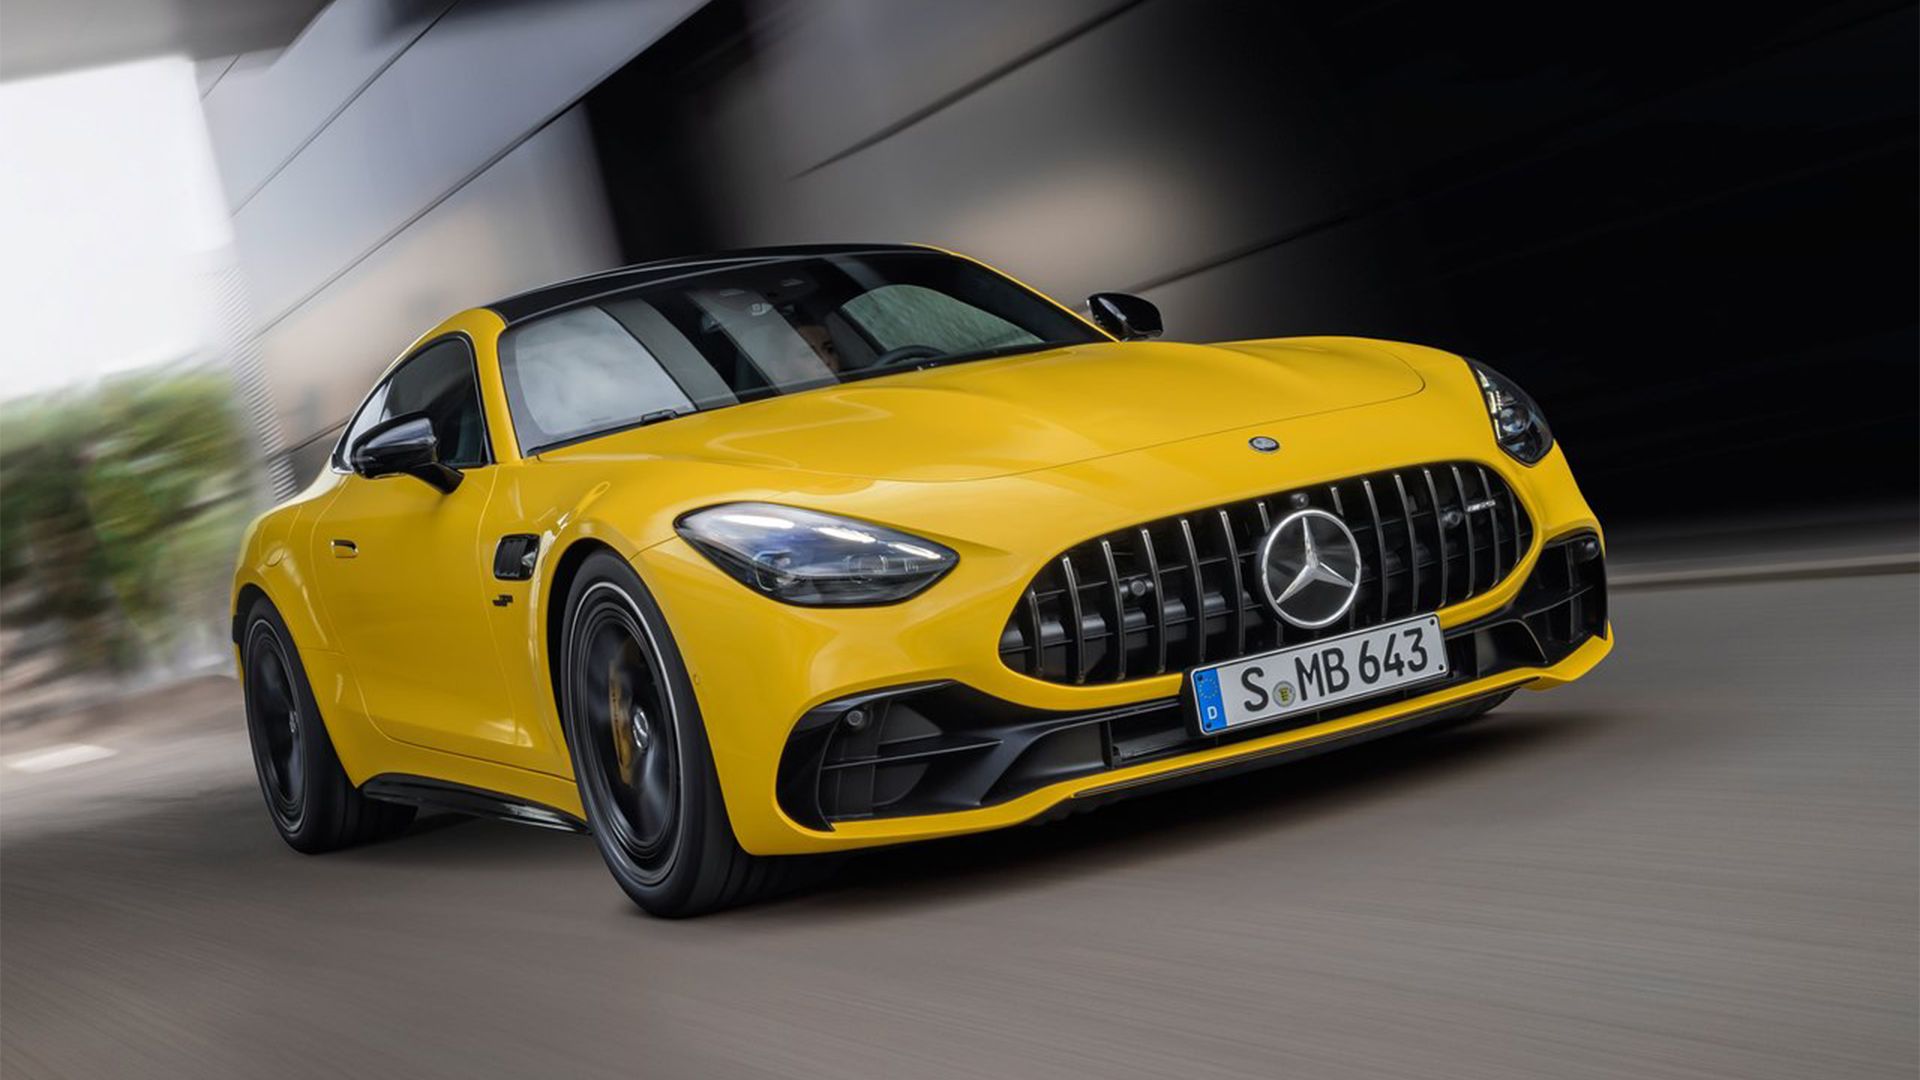 Mercedes-Benz AMG GT 43 Coupe - Front 3_4 angle